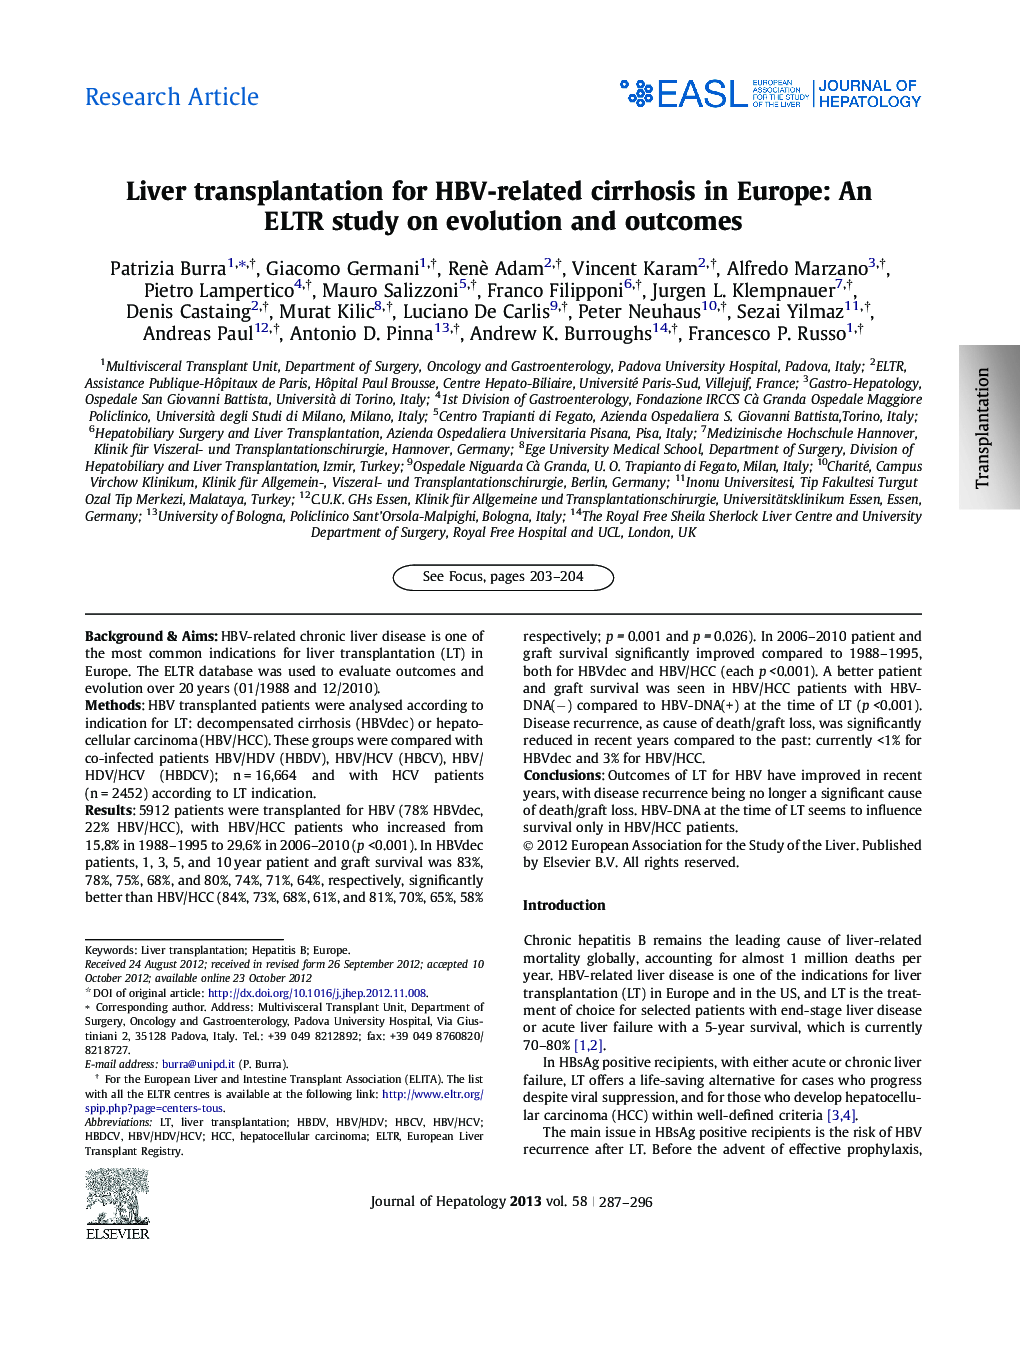 Research ArticleLiver transplantation for HBV-related cirrhosis in Europe: An ELTR study on evolution and outcomes